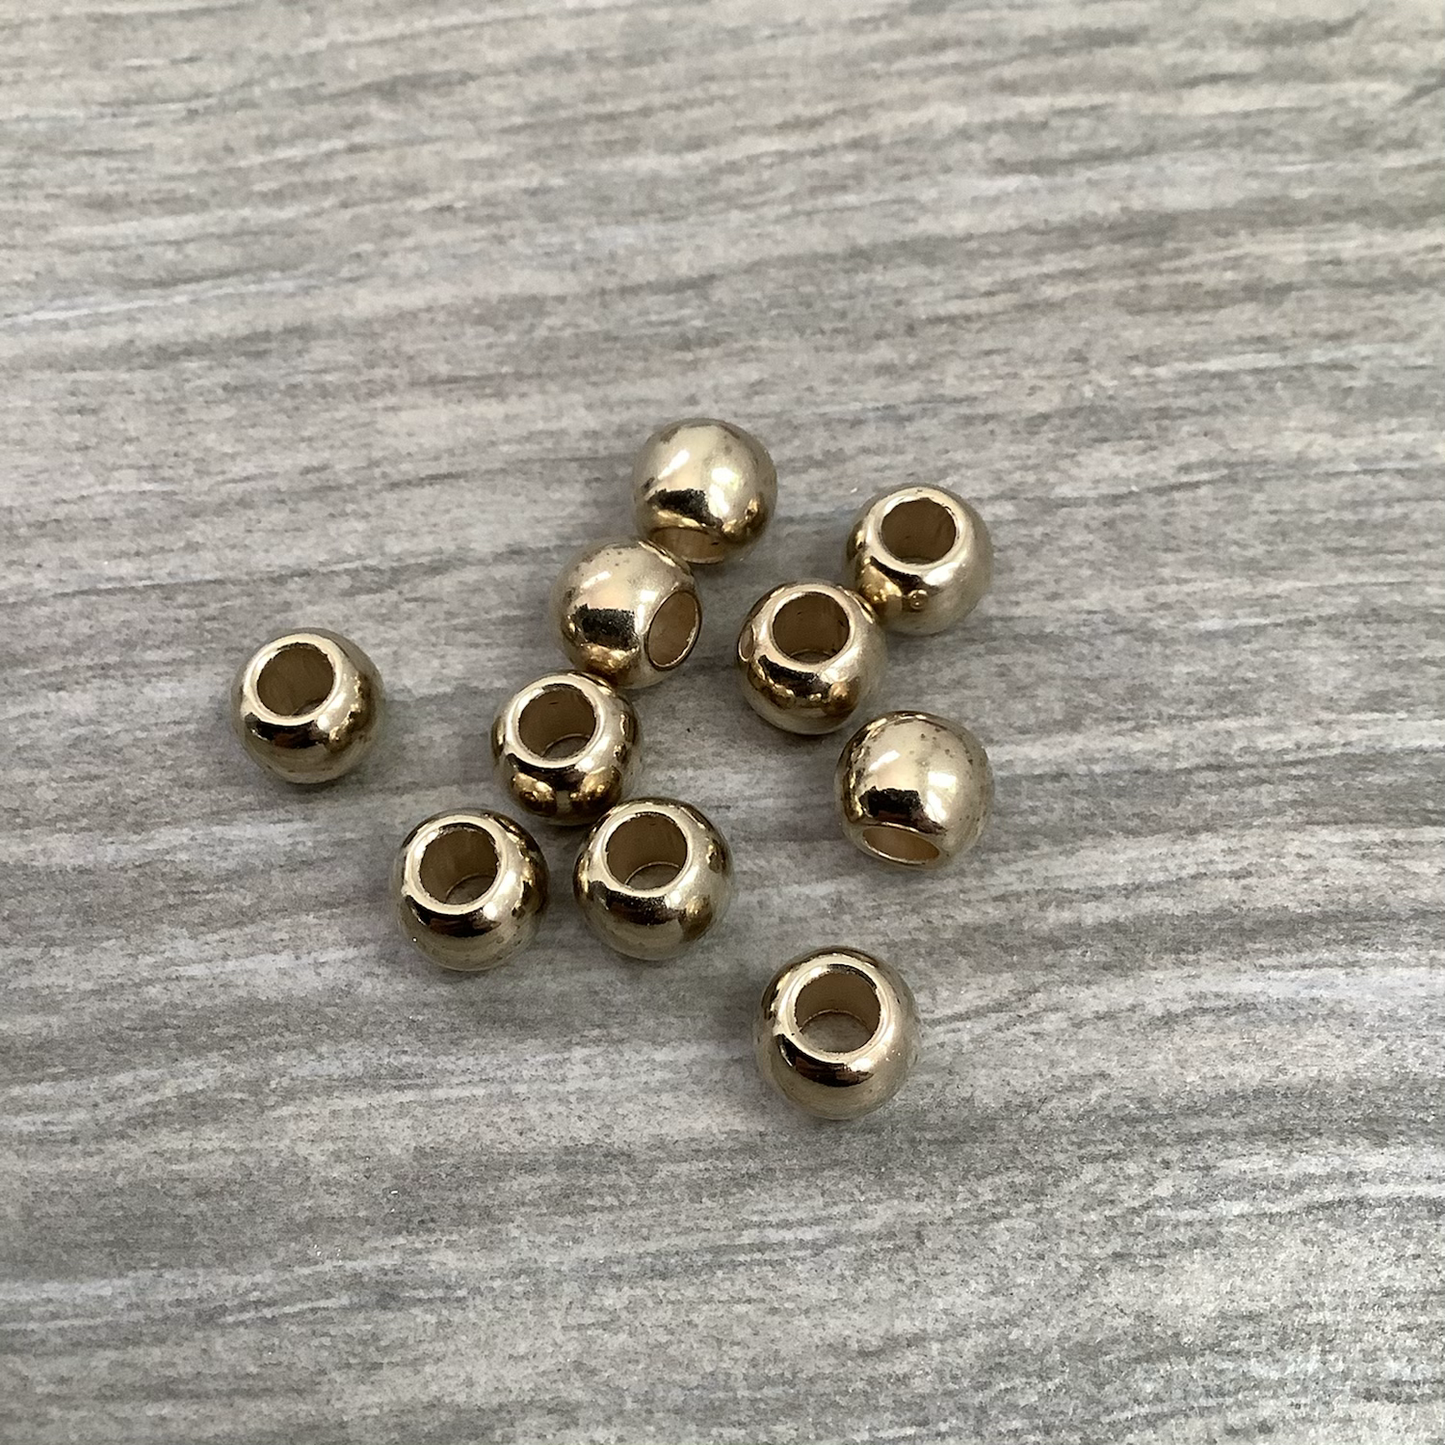 10x8mm Wide Hole Qty 10 - 23023 resin